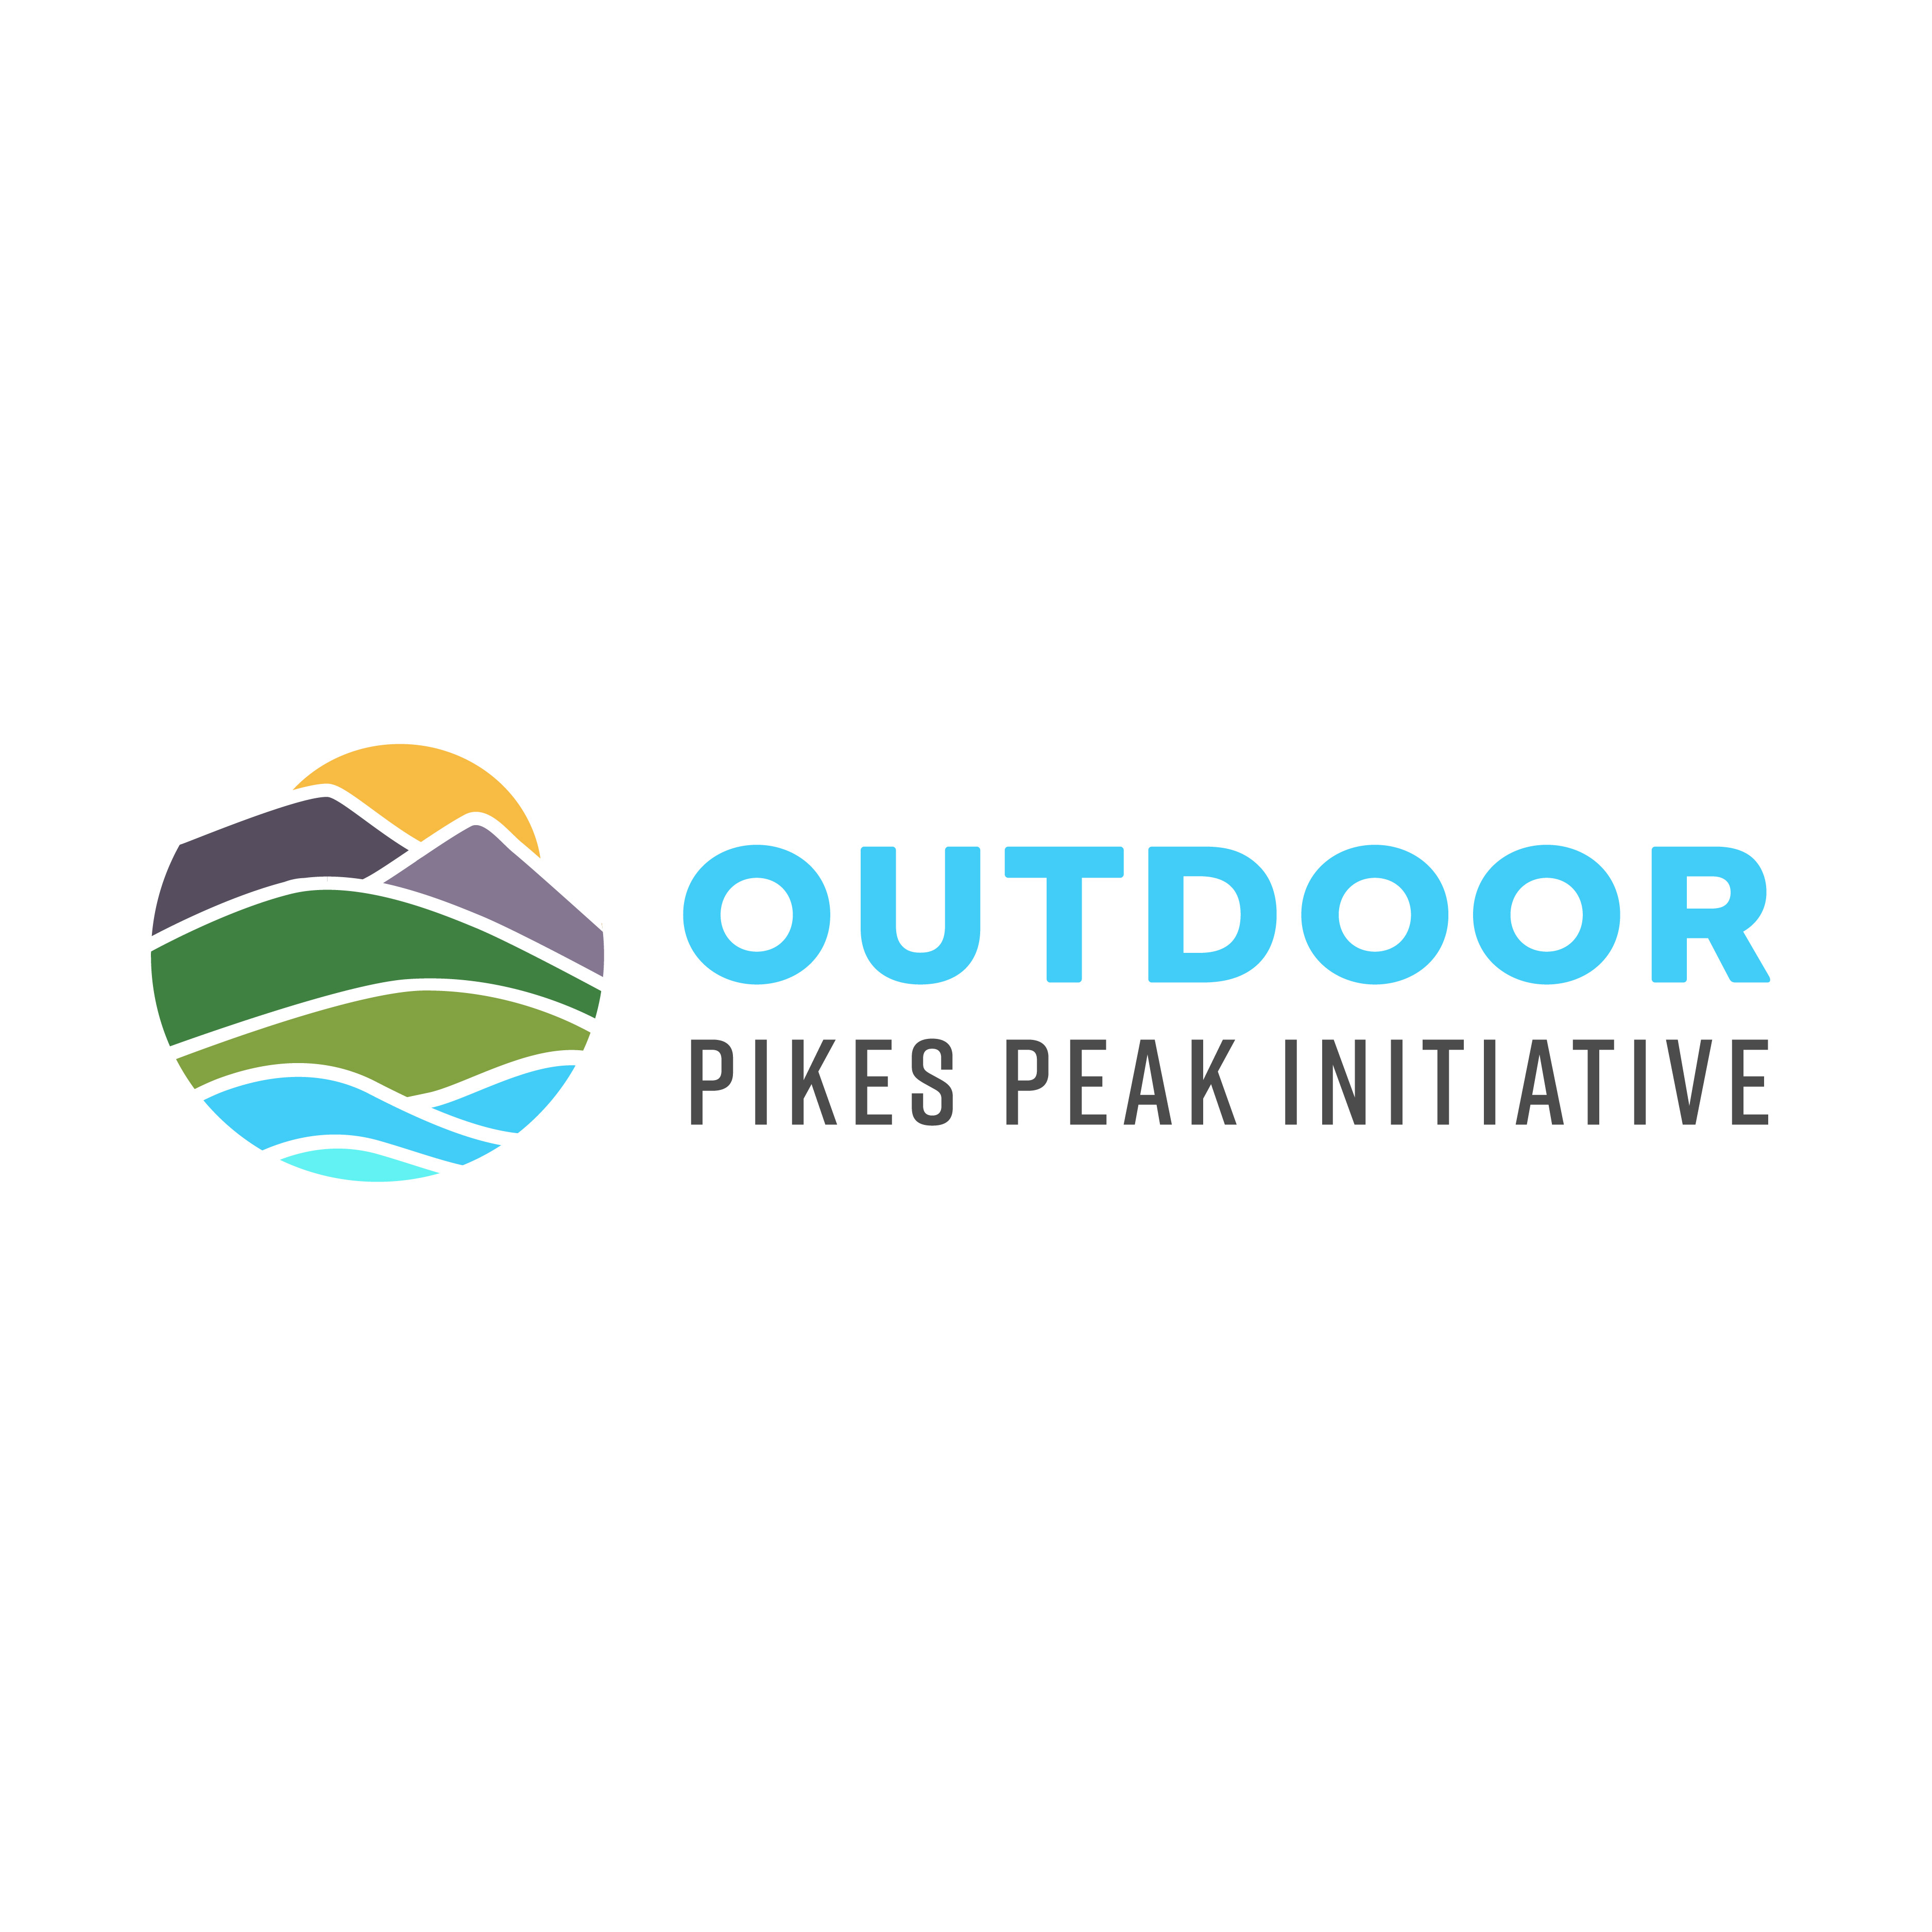 Outdoor Pikes Peak Initiative logo design by logo designer Neon Pig Creative for your inspiration and for the worlds largest logo competition